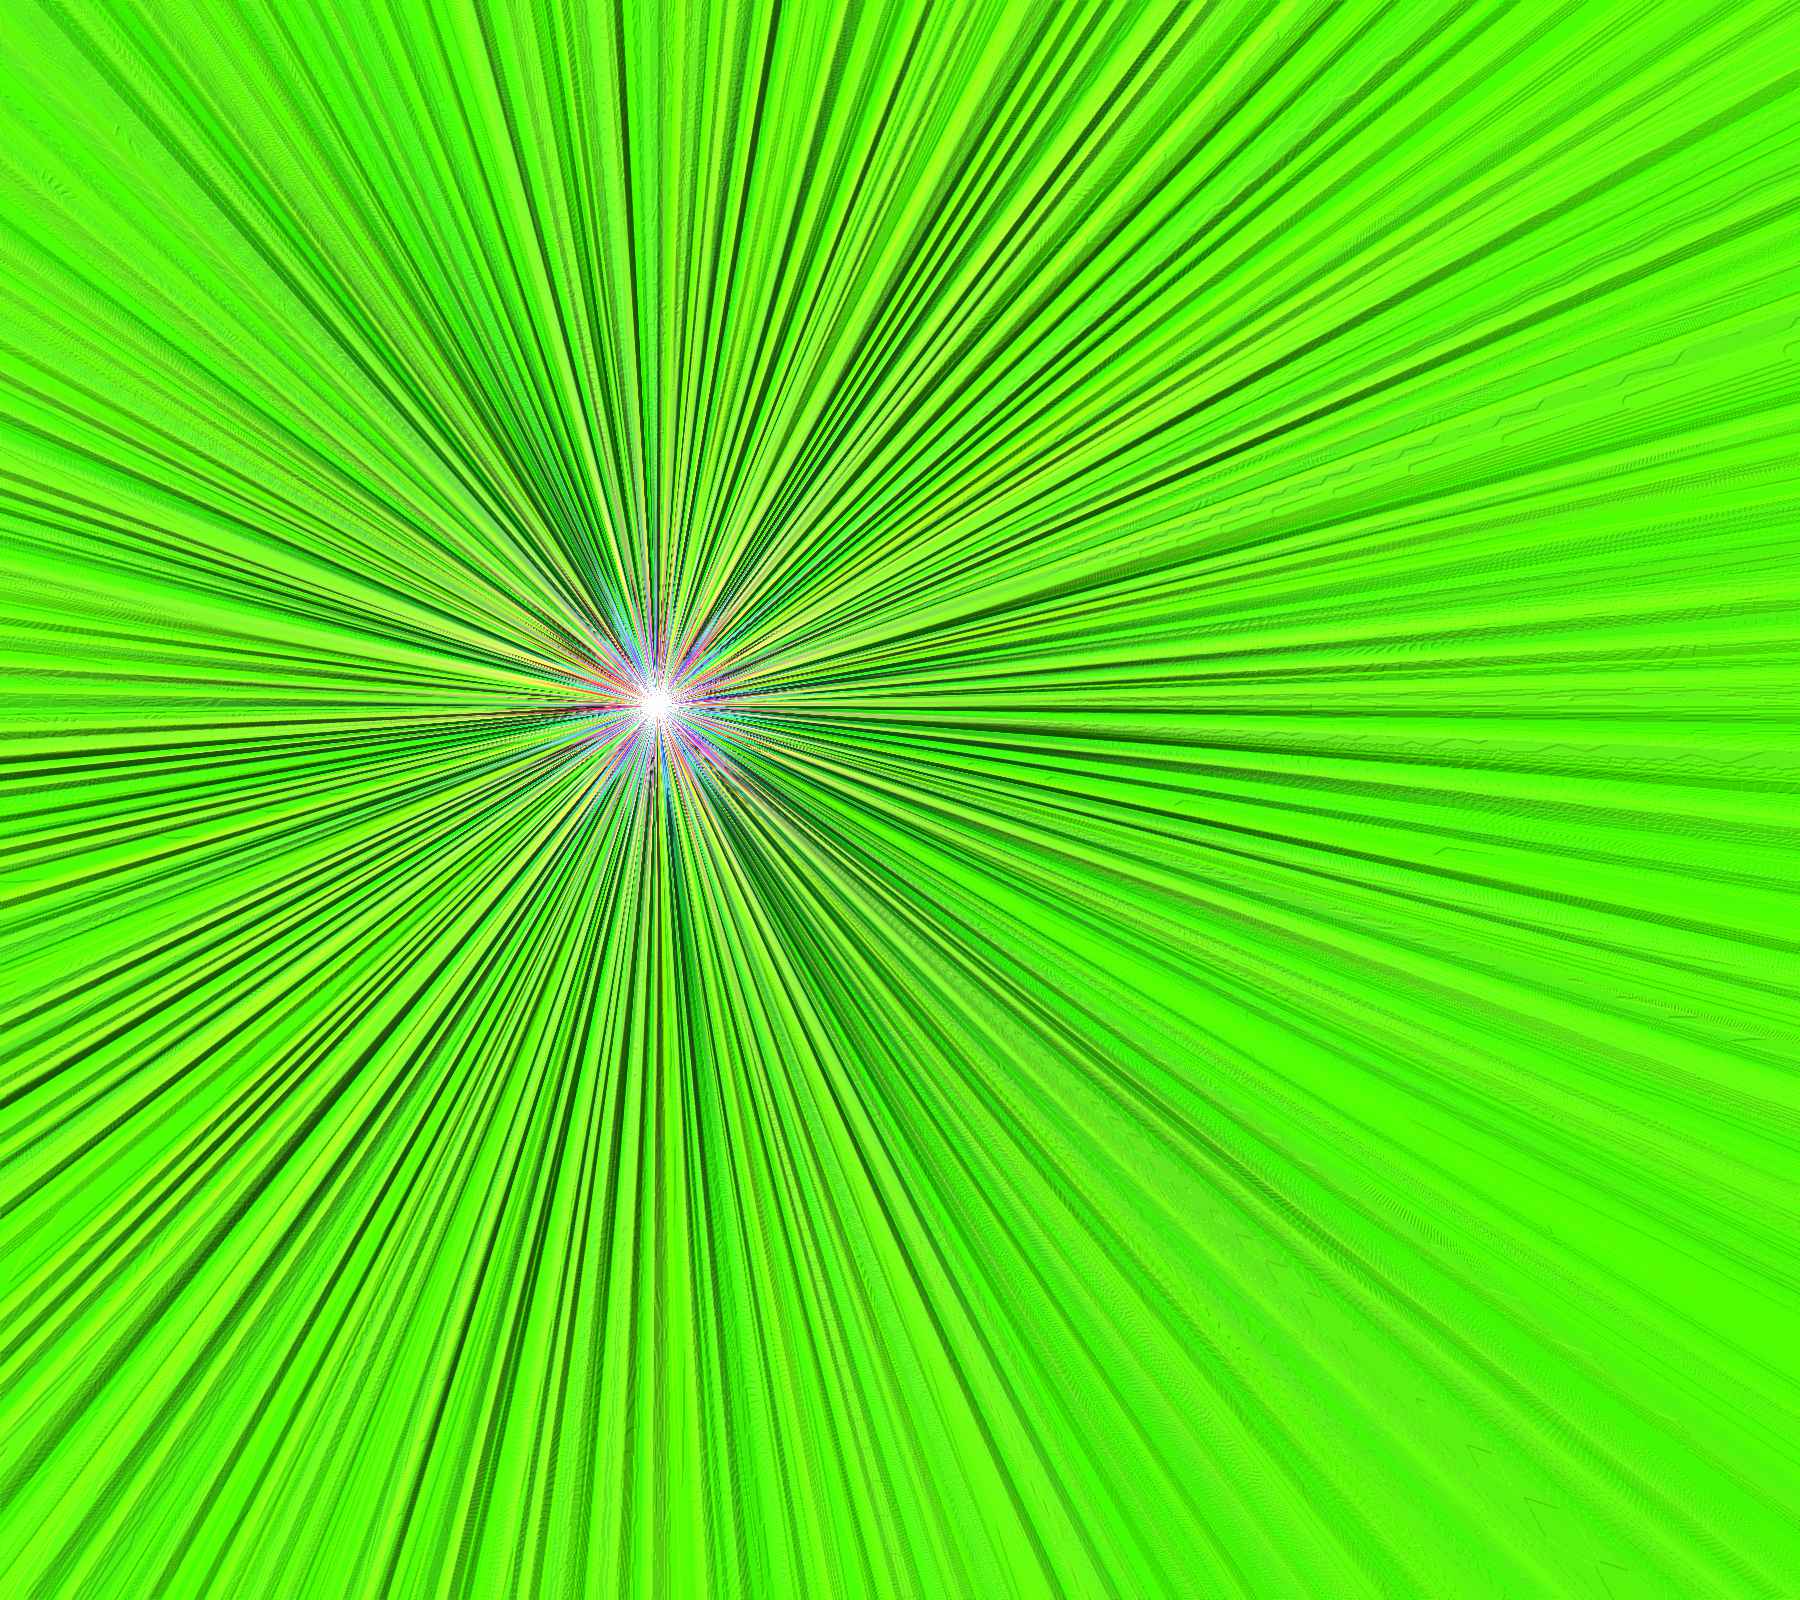 Neon Green Backgrounds Wallpaper Hd Phone Of Iphone - Green Color Images  Download - 1800x1600 Wallpaper 